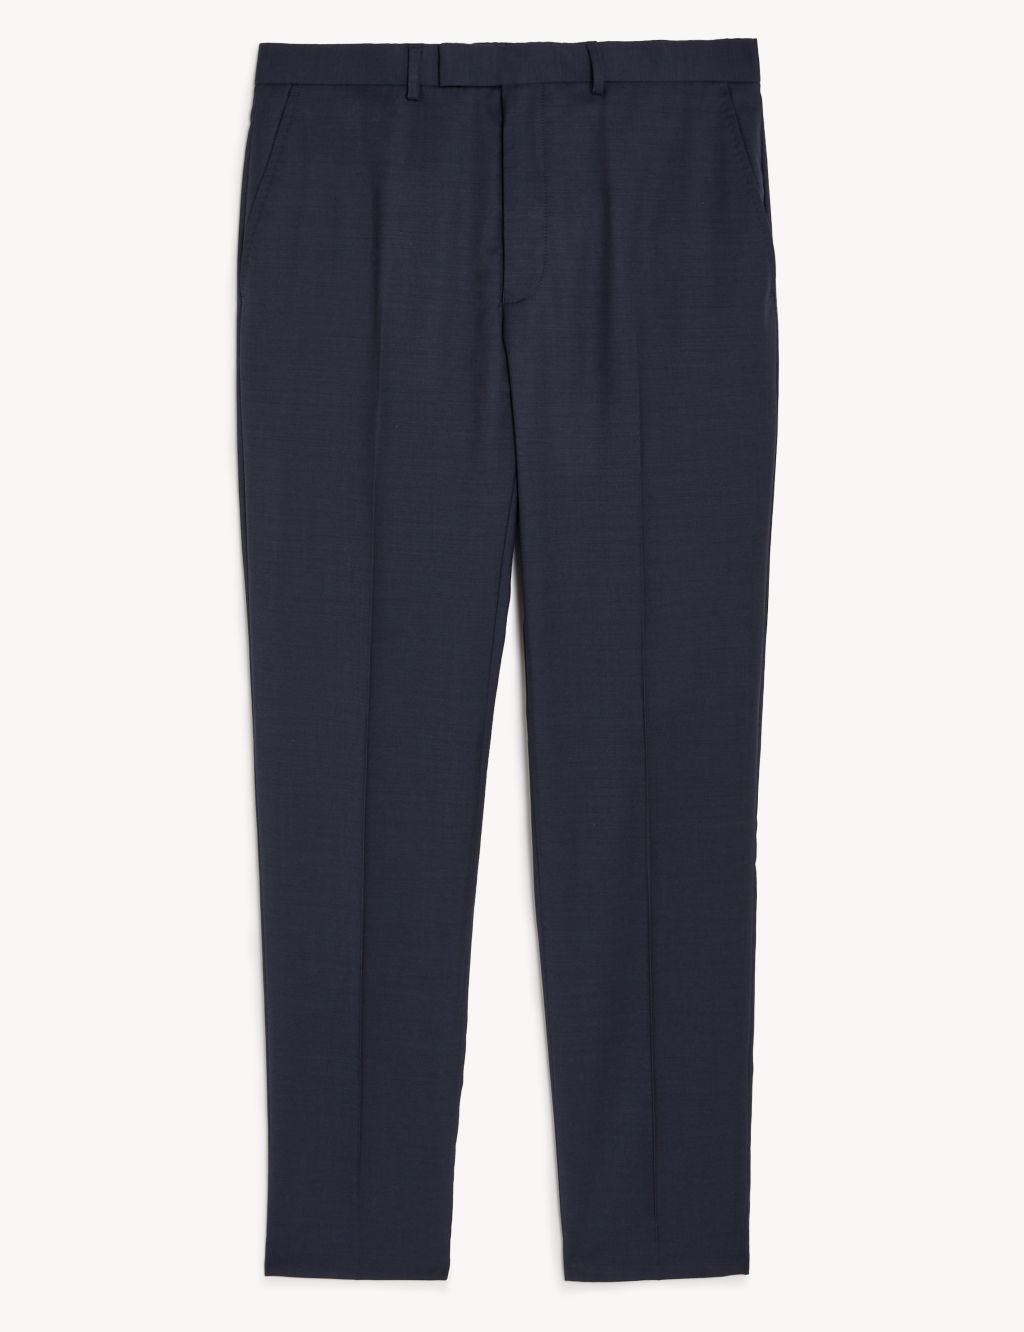 Tailored Fit Pure Wool Suit Trousers image 2